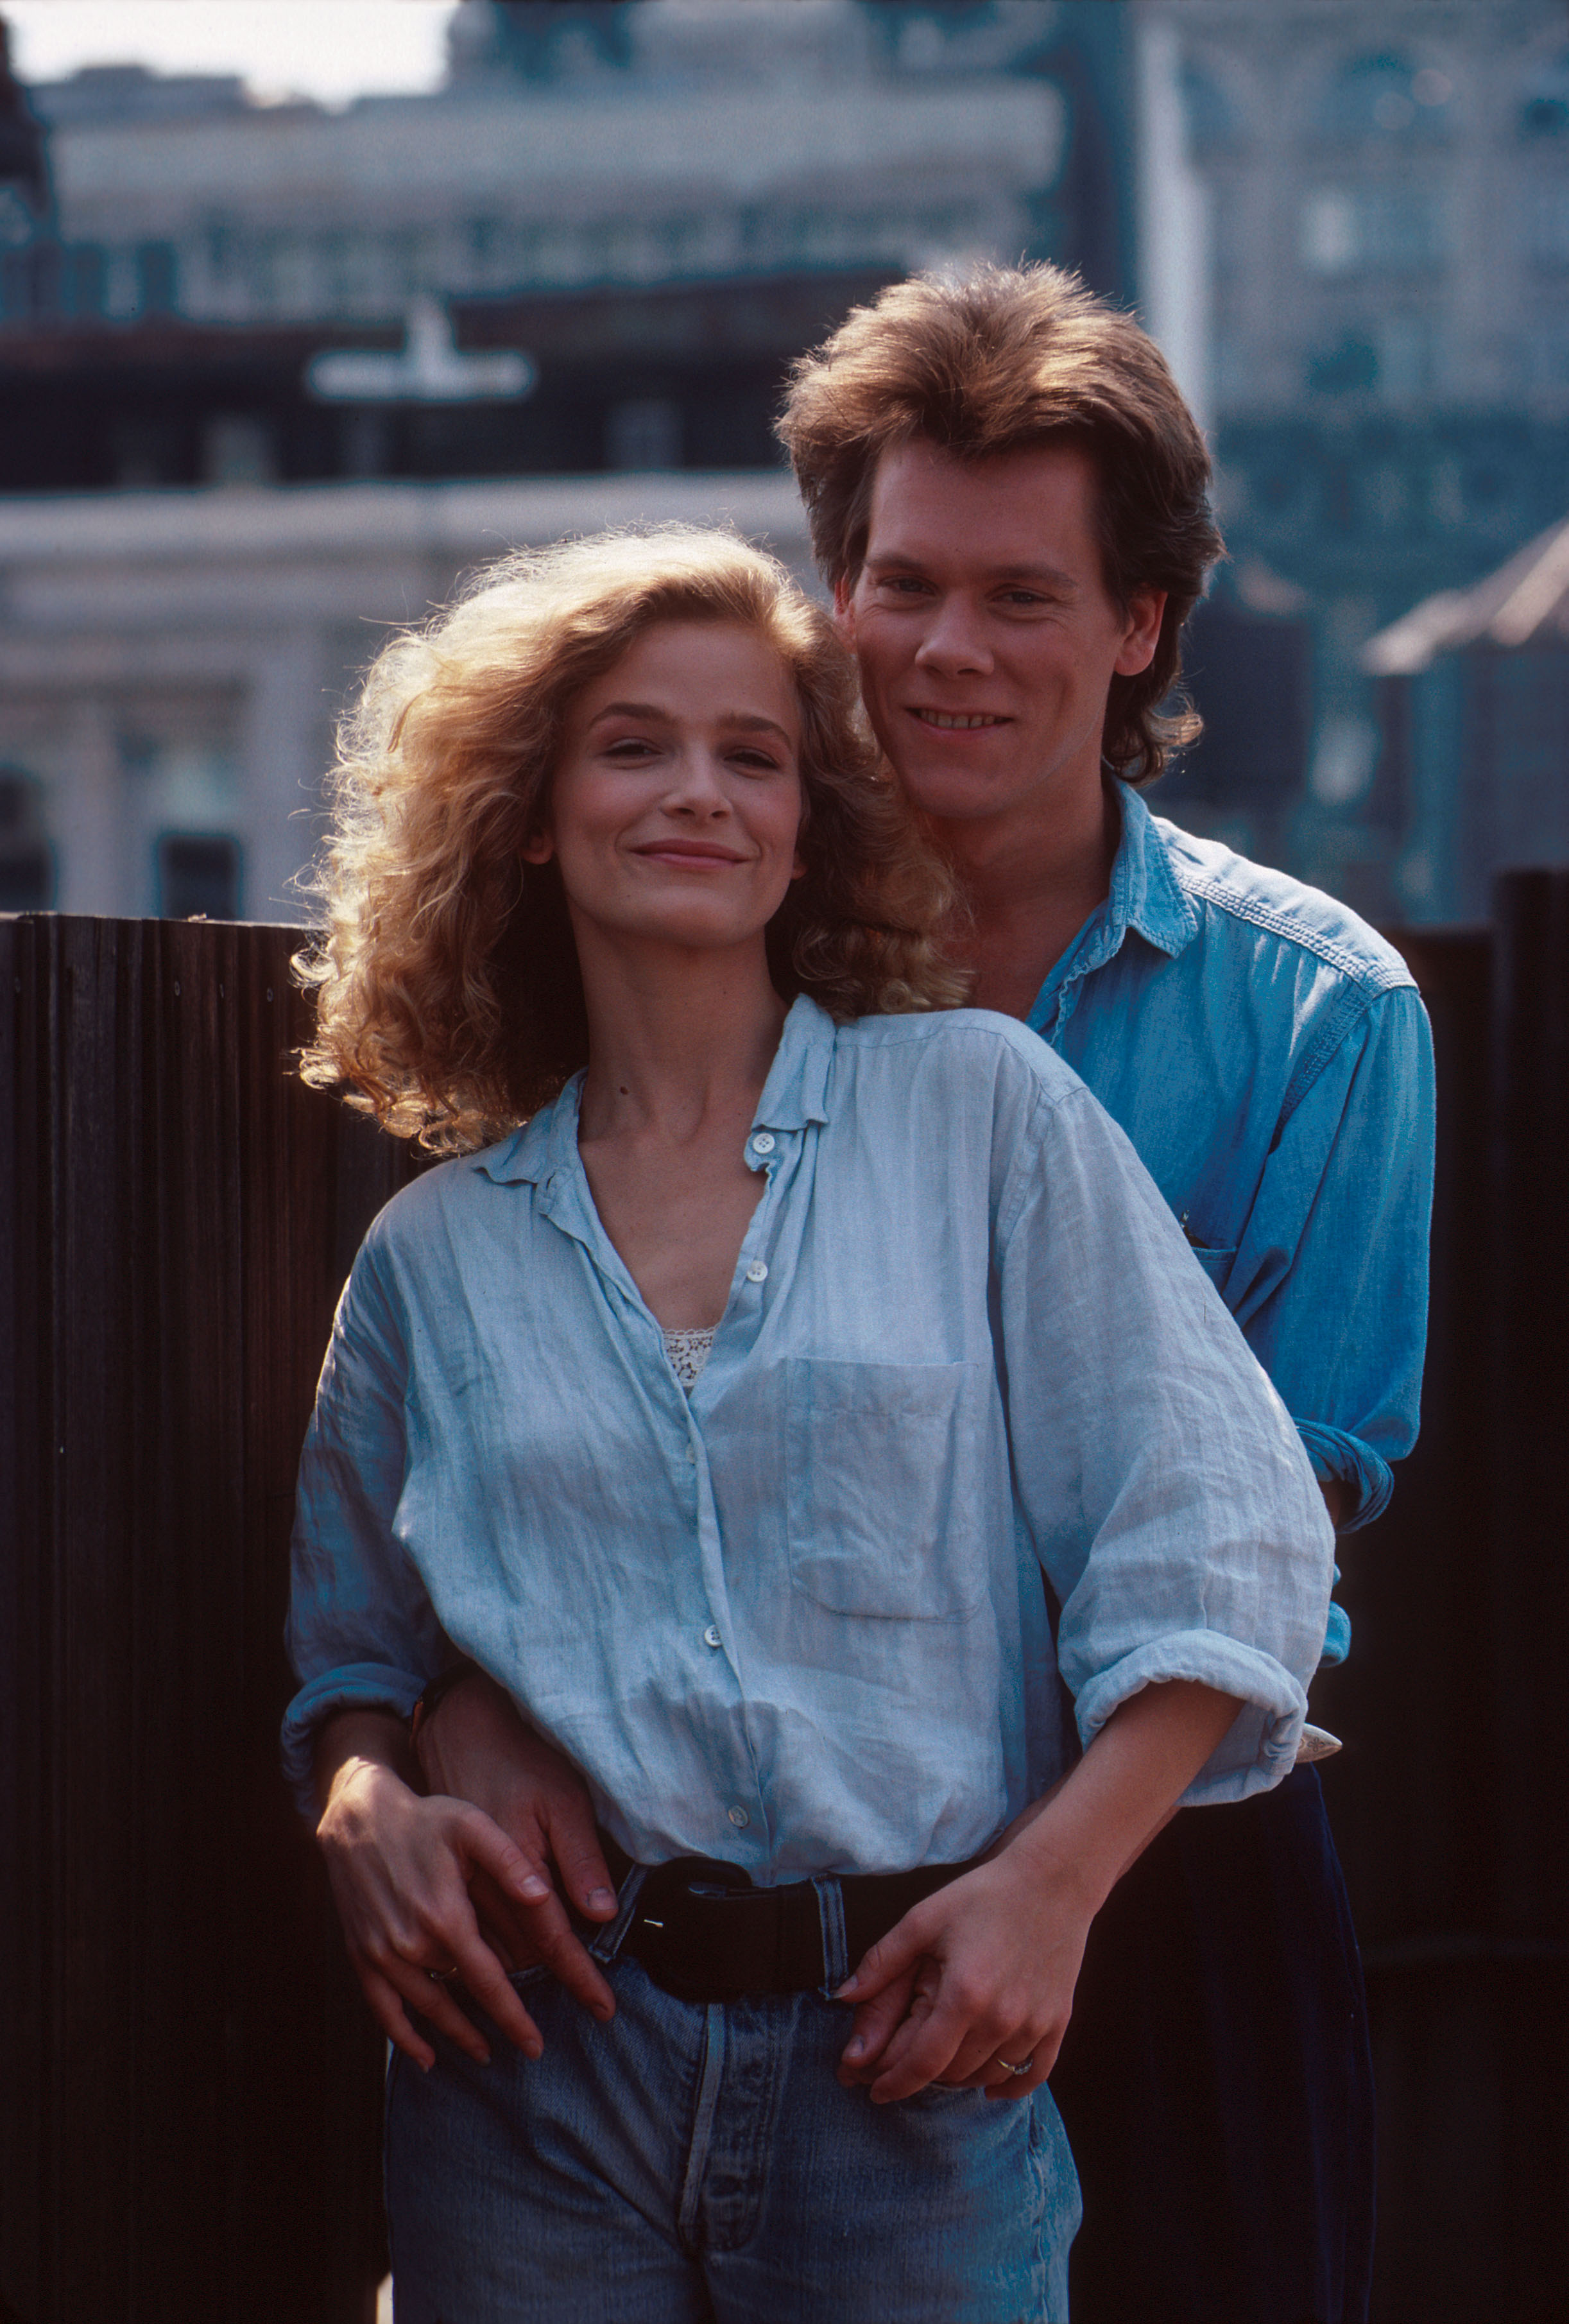 Kevin Bacon with Kyra Sedgwick in New York in August 1988. | Source: Getty Images